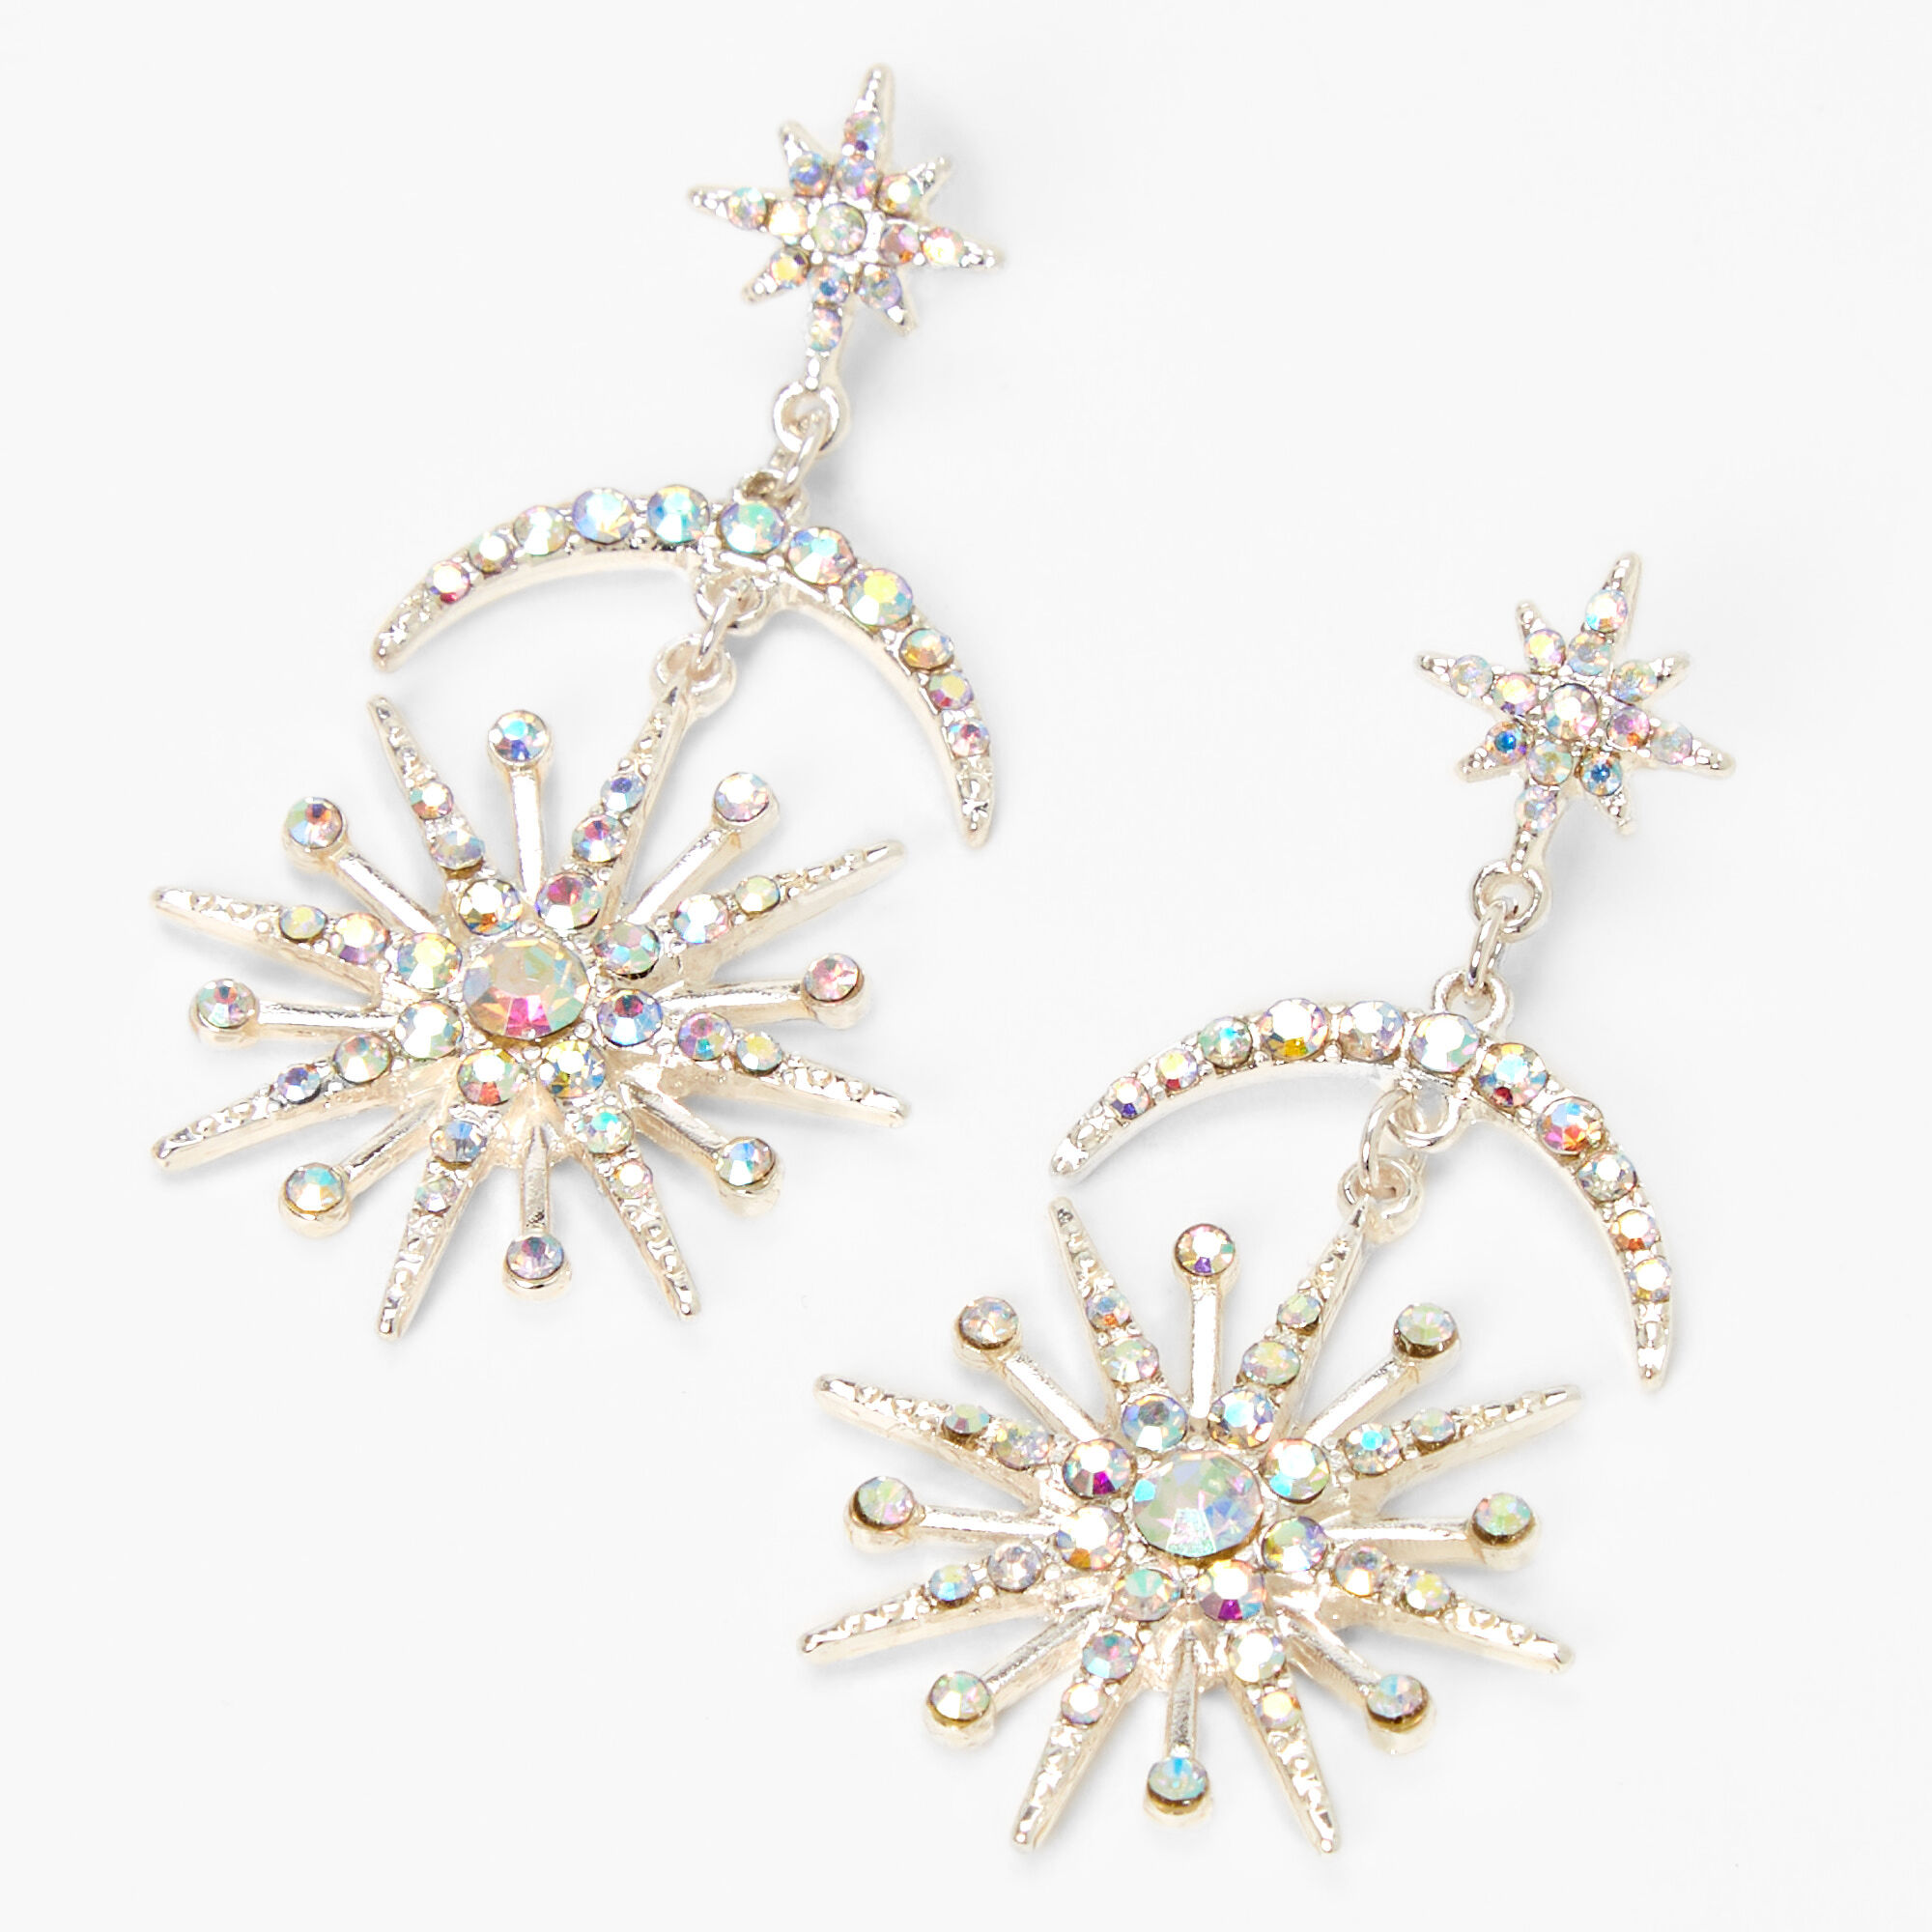 1930s Art Deco Style Jewelry – Costume Jewelry Icing Silver 2 Iridescent Starburst Moon Drop Earrings $12.99 AT vintagedancer.com